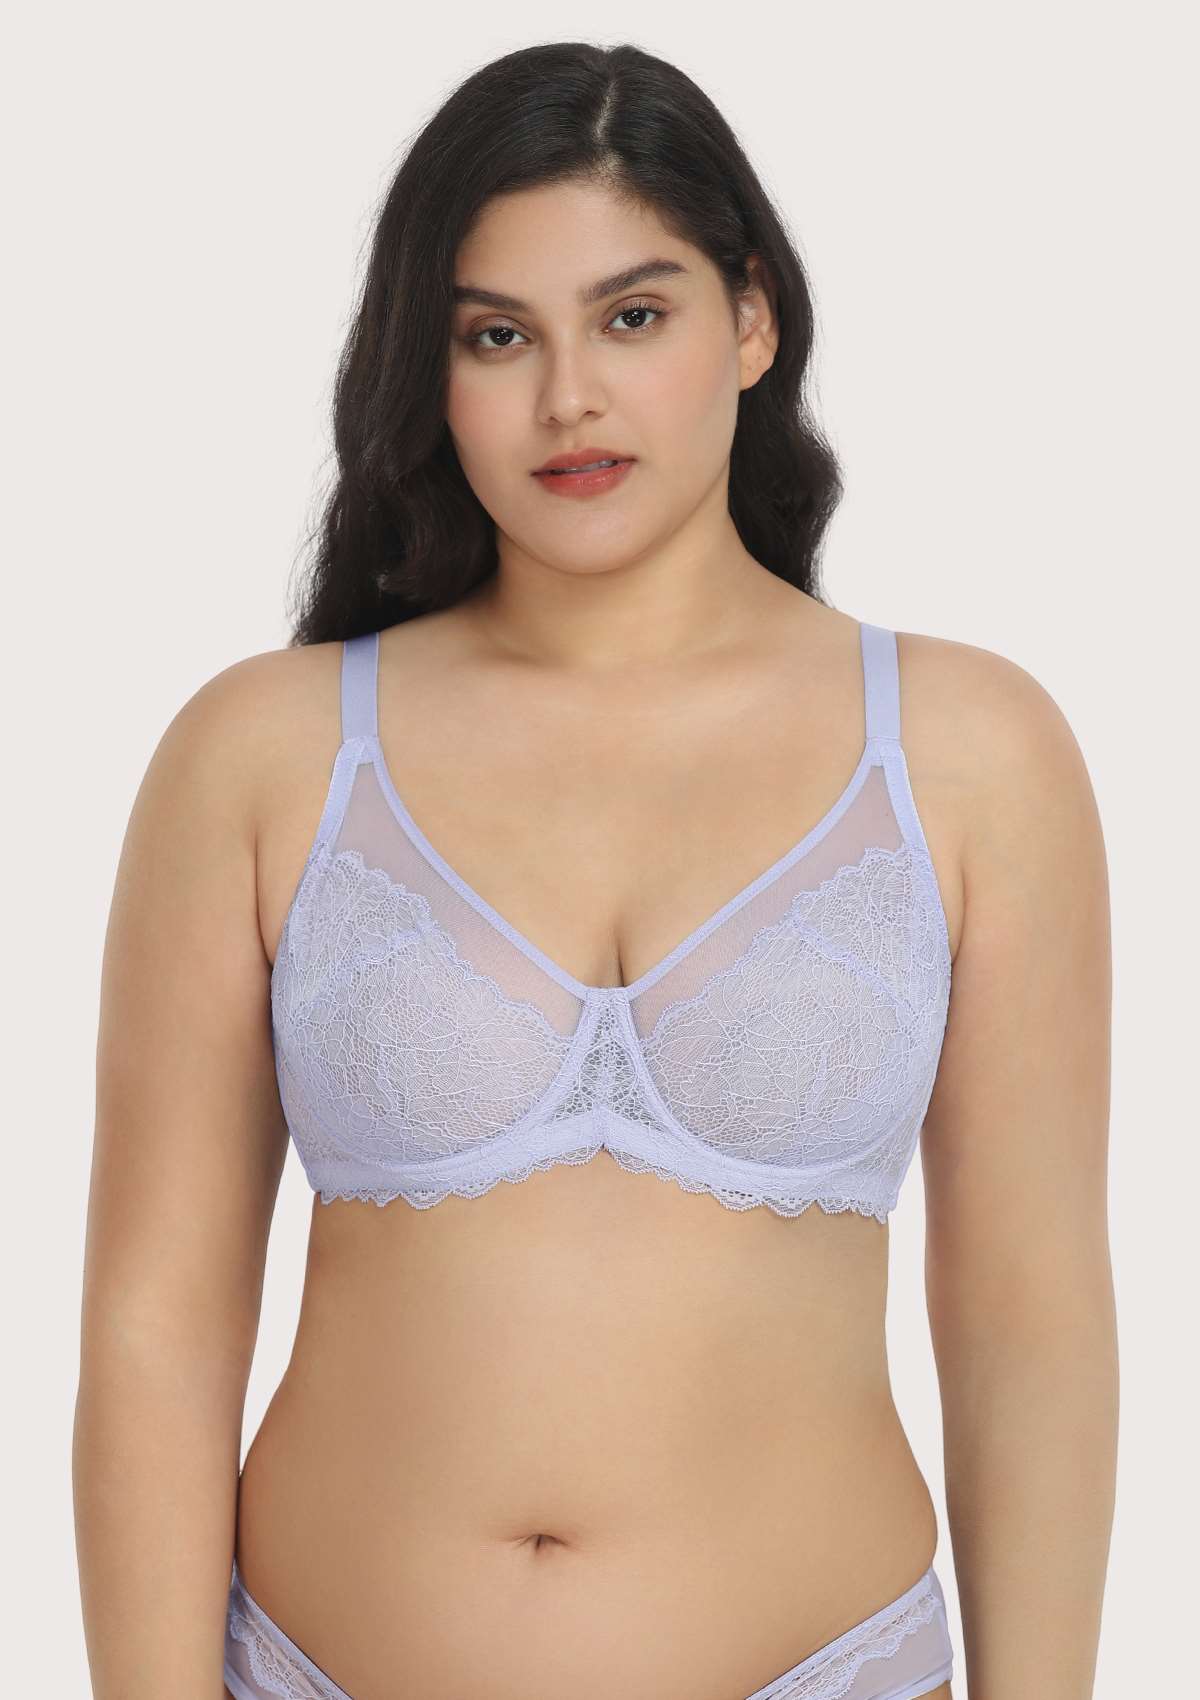 HSIA Wisteria Bra For Lift And Support - Full Coverage Minimizer Bra - Light Pink / 40 / D